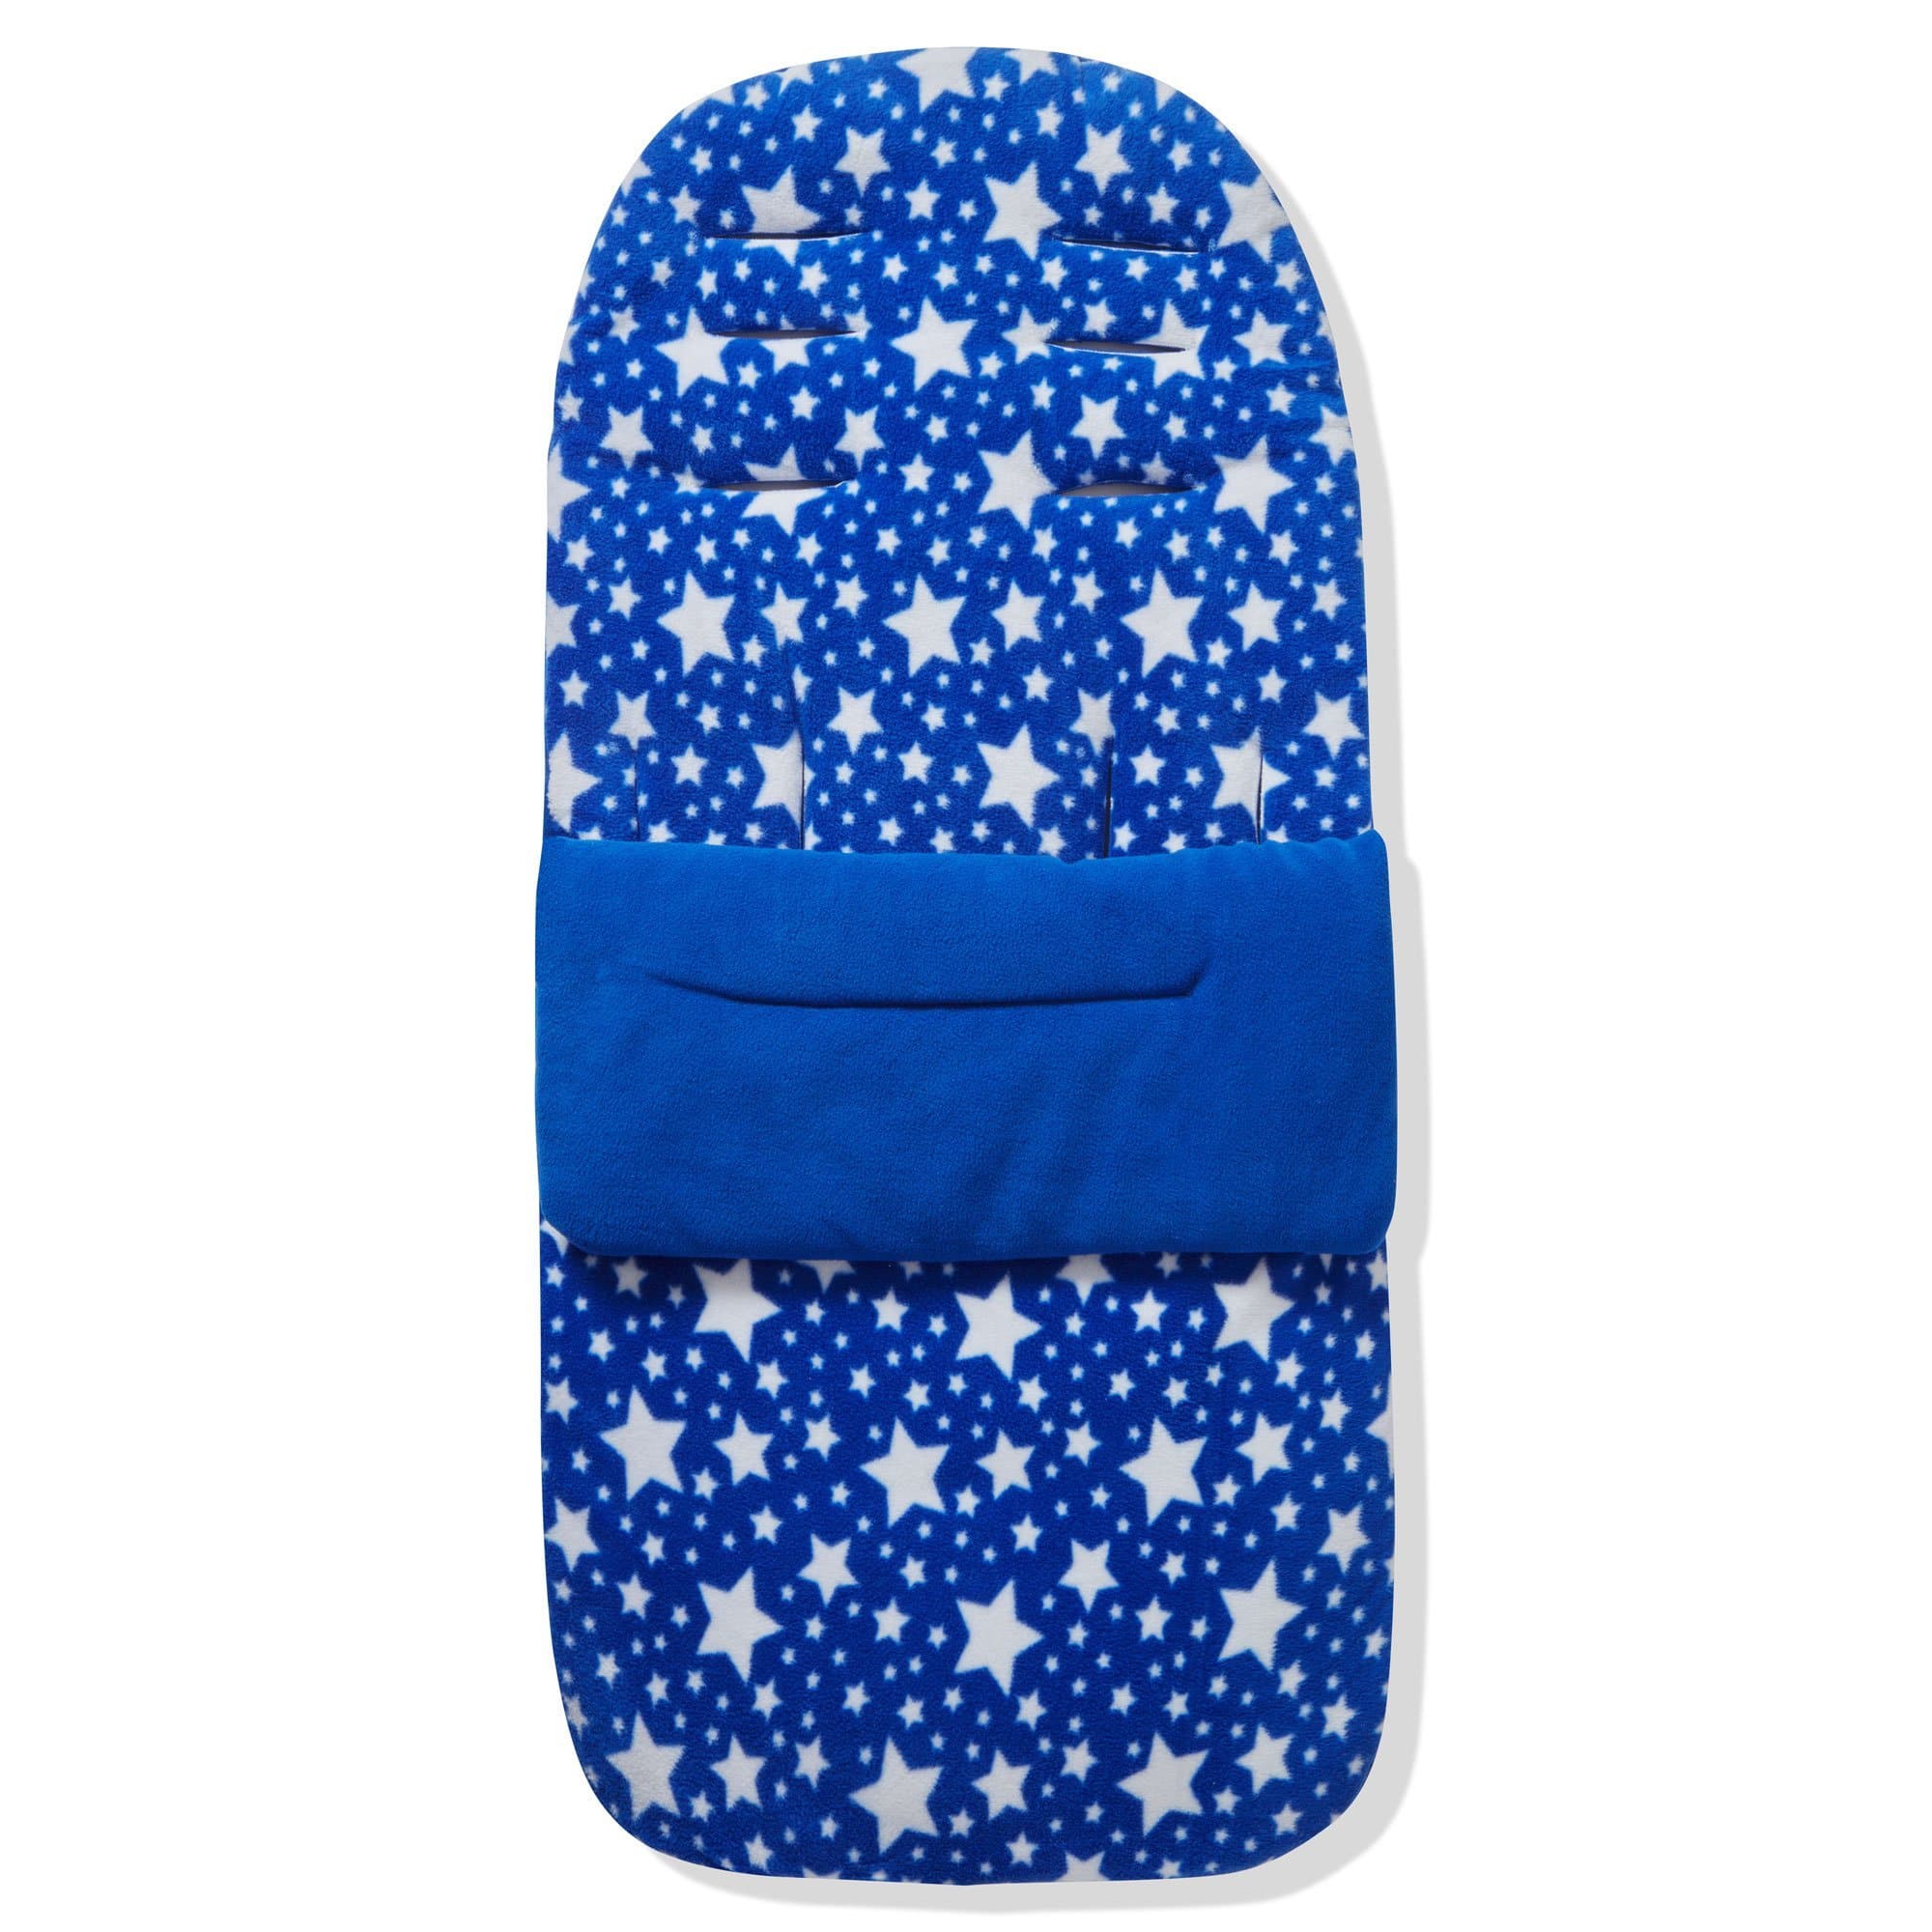 Fleece Footmuff / Cosy Toes Compatible with Zooper - Blue Star / Fits All Models | For Your Little One